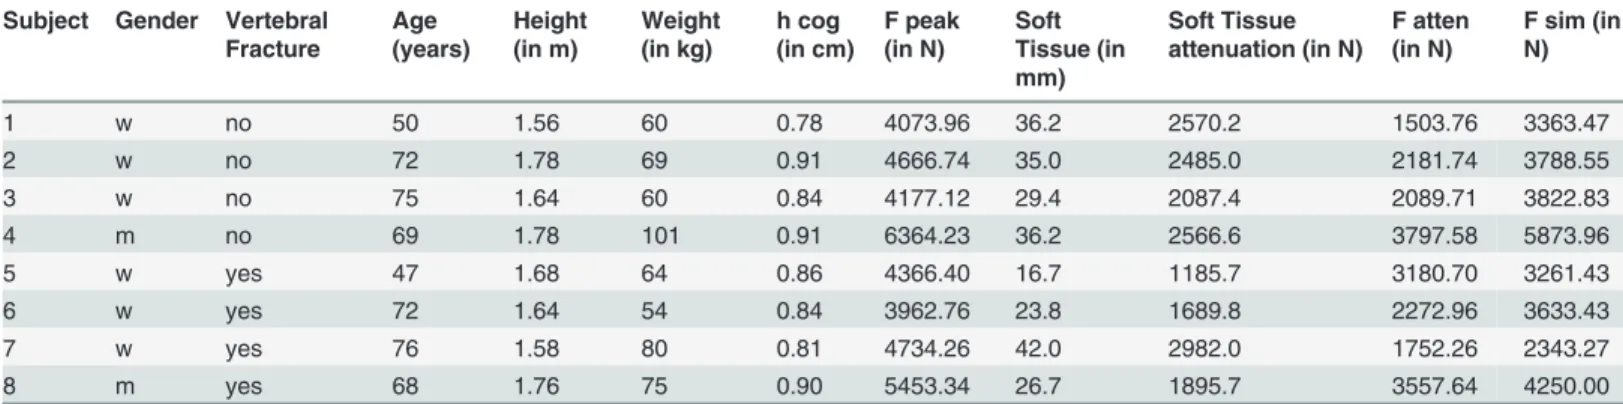 Table 1. Patient characteristics of the subjects from the fracture group and the control group and according force calculation values derived from the FEA simulations.